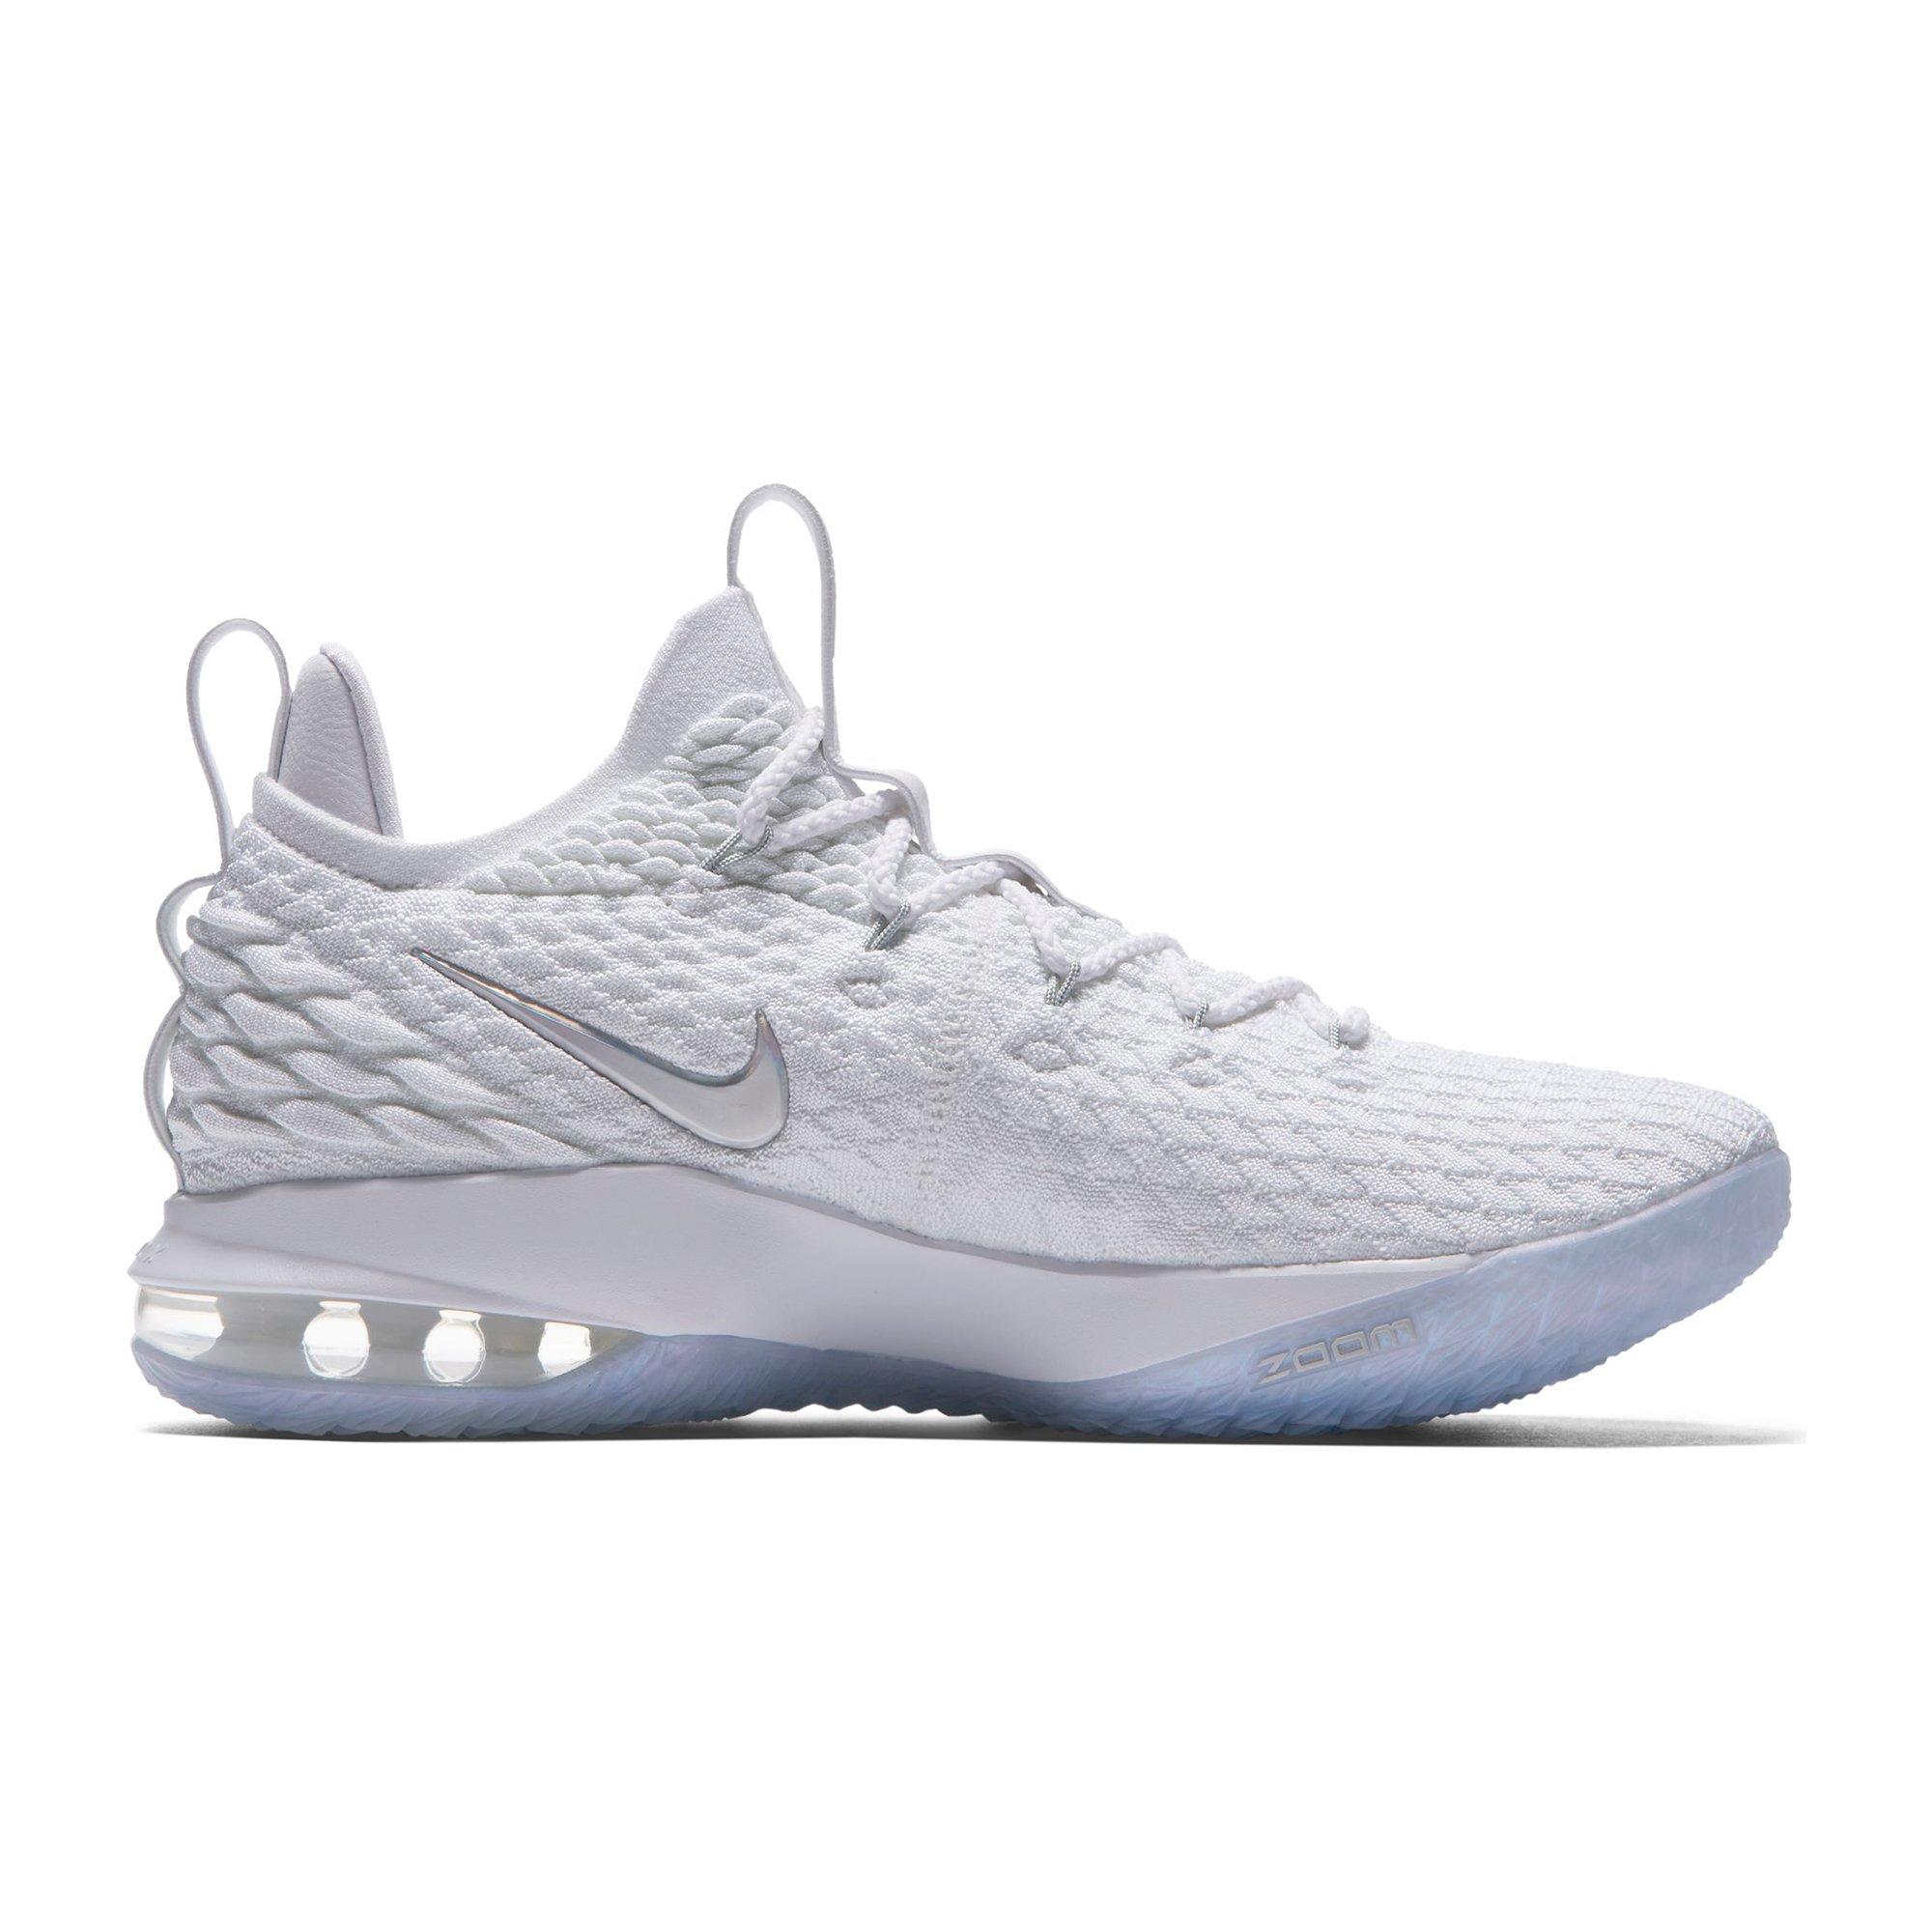 lebron 15 low top